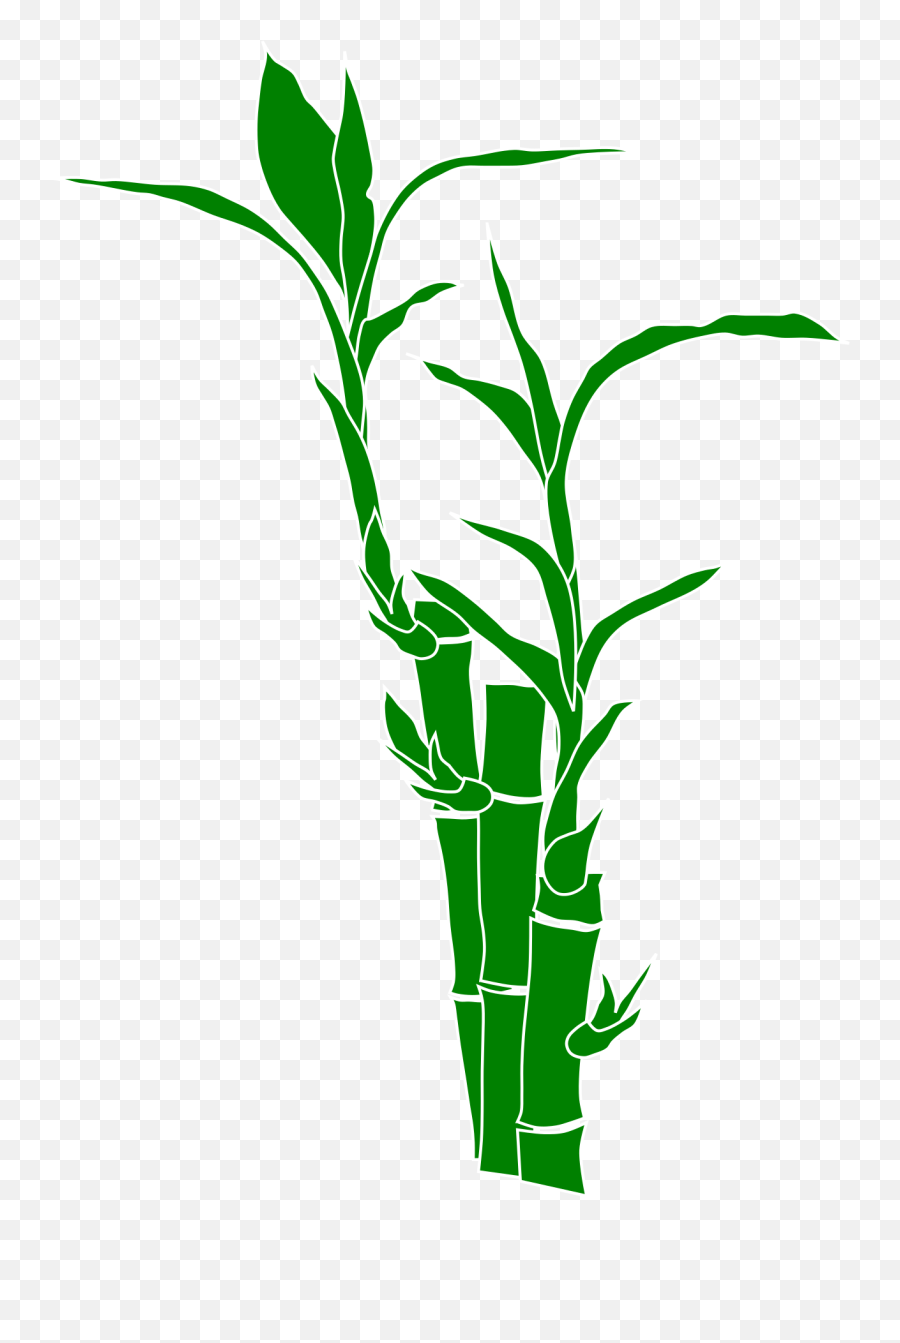 Library Of Bamboo Tree Image Png Files - Bamboo Shoot Health Benefits,Bamboo Leaves Png